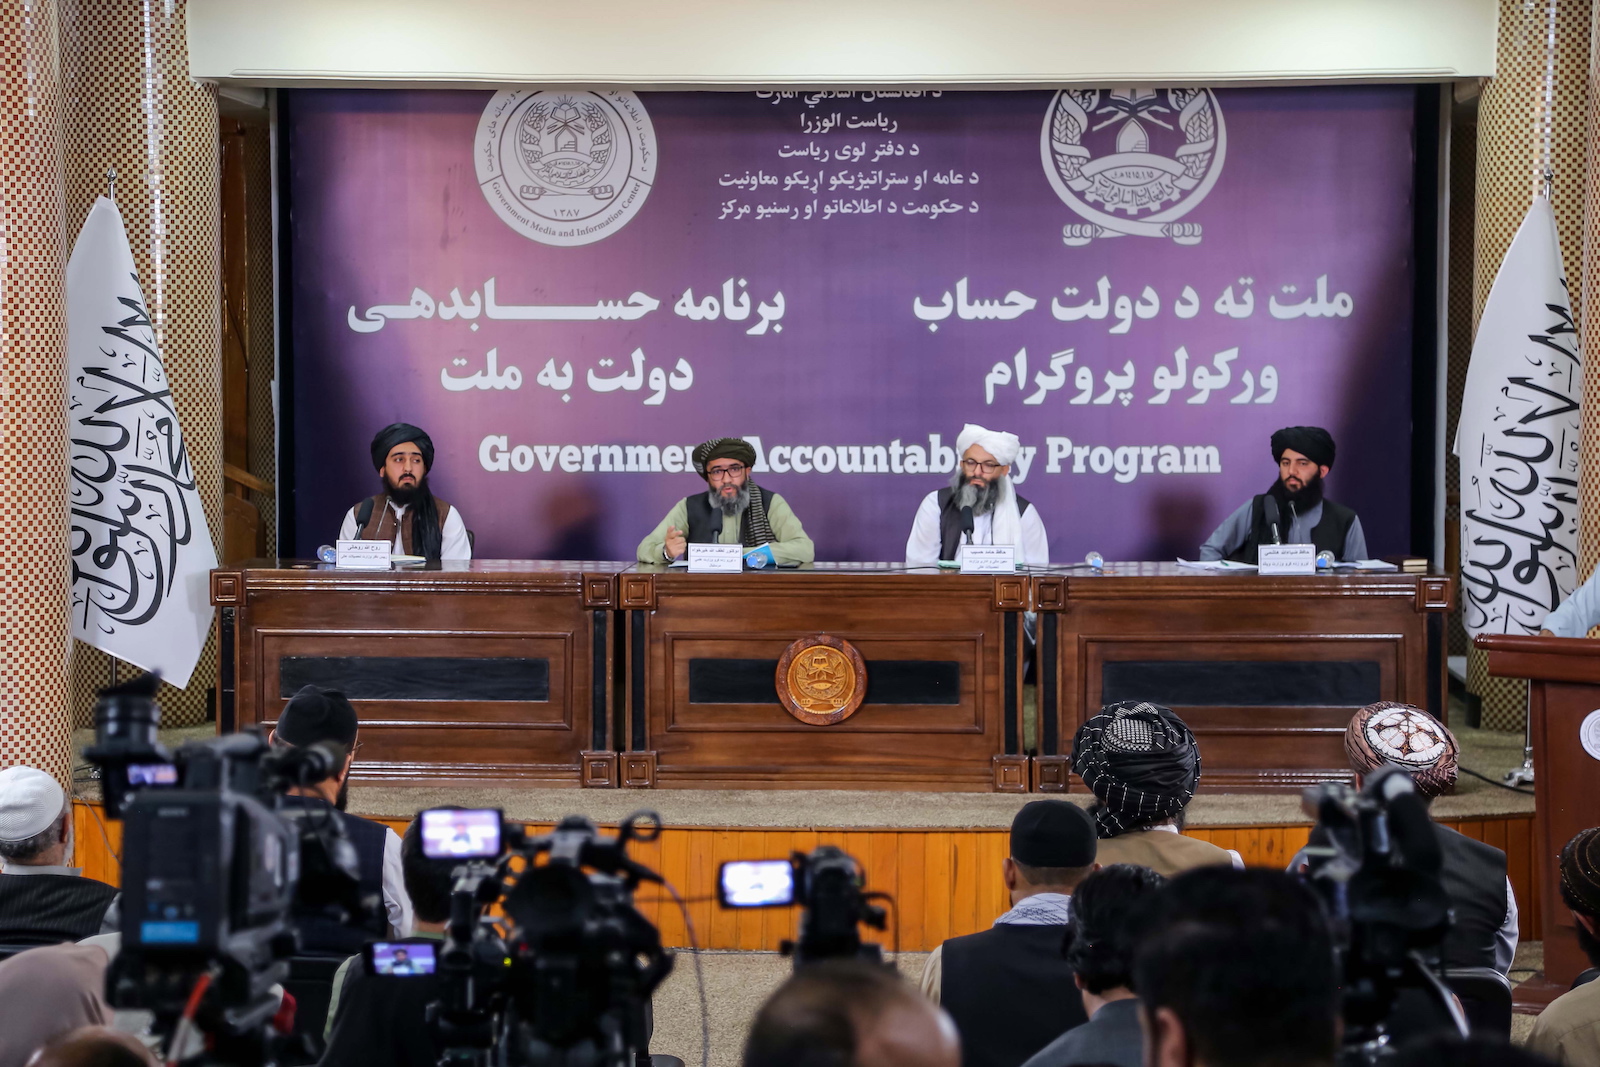 epa10811755 Journalists attend a press conference organized by the Ministry of Higher Education in Kabul, Afghanistan, 21 August 2023. The Ministry of Higher Education of Afghanistan is working on a plan to reopen universities for women, according to their annual report although the timeline for finalizing this plan is unclear. The ministry has also introduced new educational programs, including 3 doctoral and 15 master's programs in the past year, bringing the total to 9 doctoral and 40 master's programs. However, the ministry is facing challenges as around 200 to 250 professors have left the country, leaving 6,000 teaching vacancies in universities.  EPA/SAMIULLAH POPAL